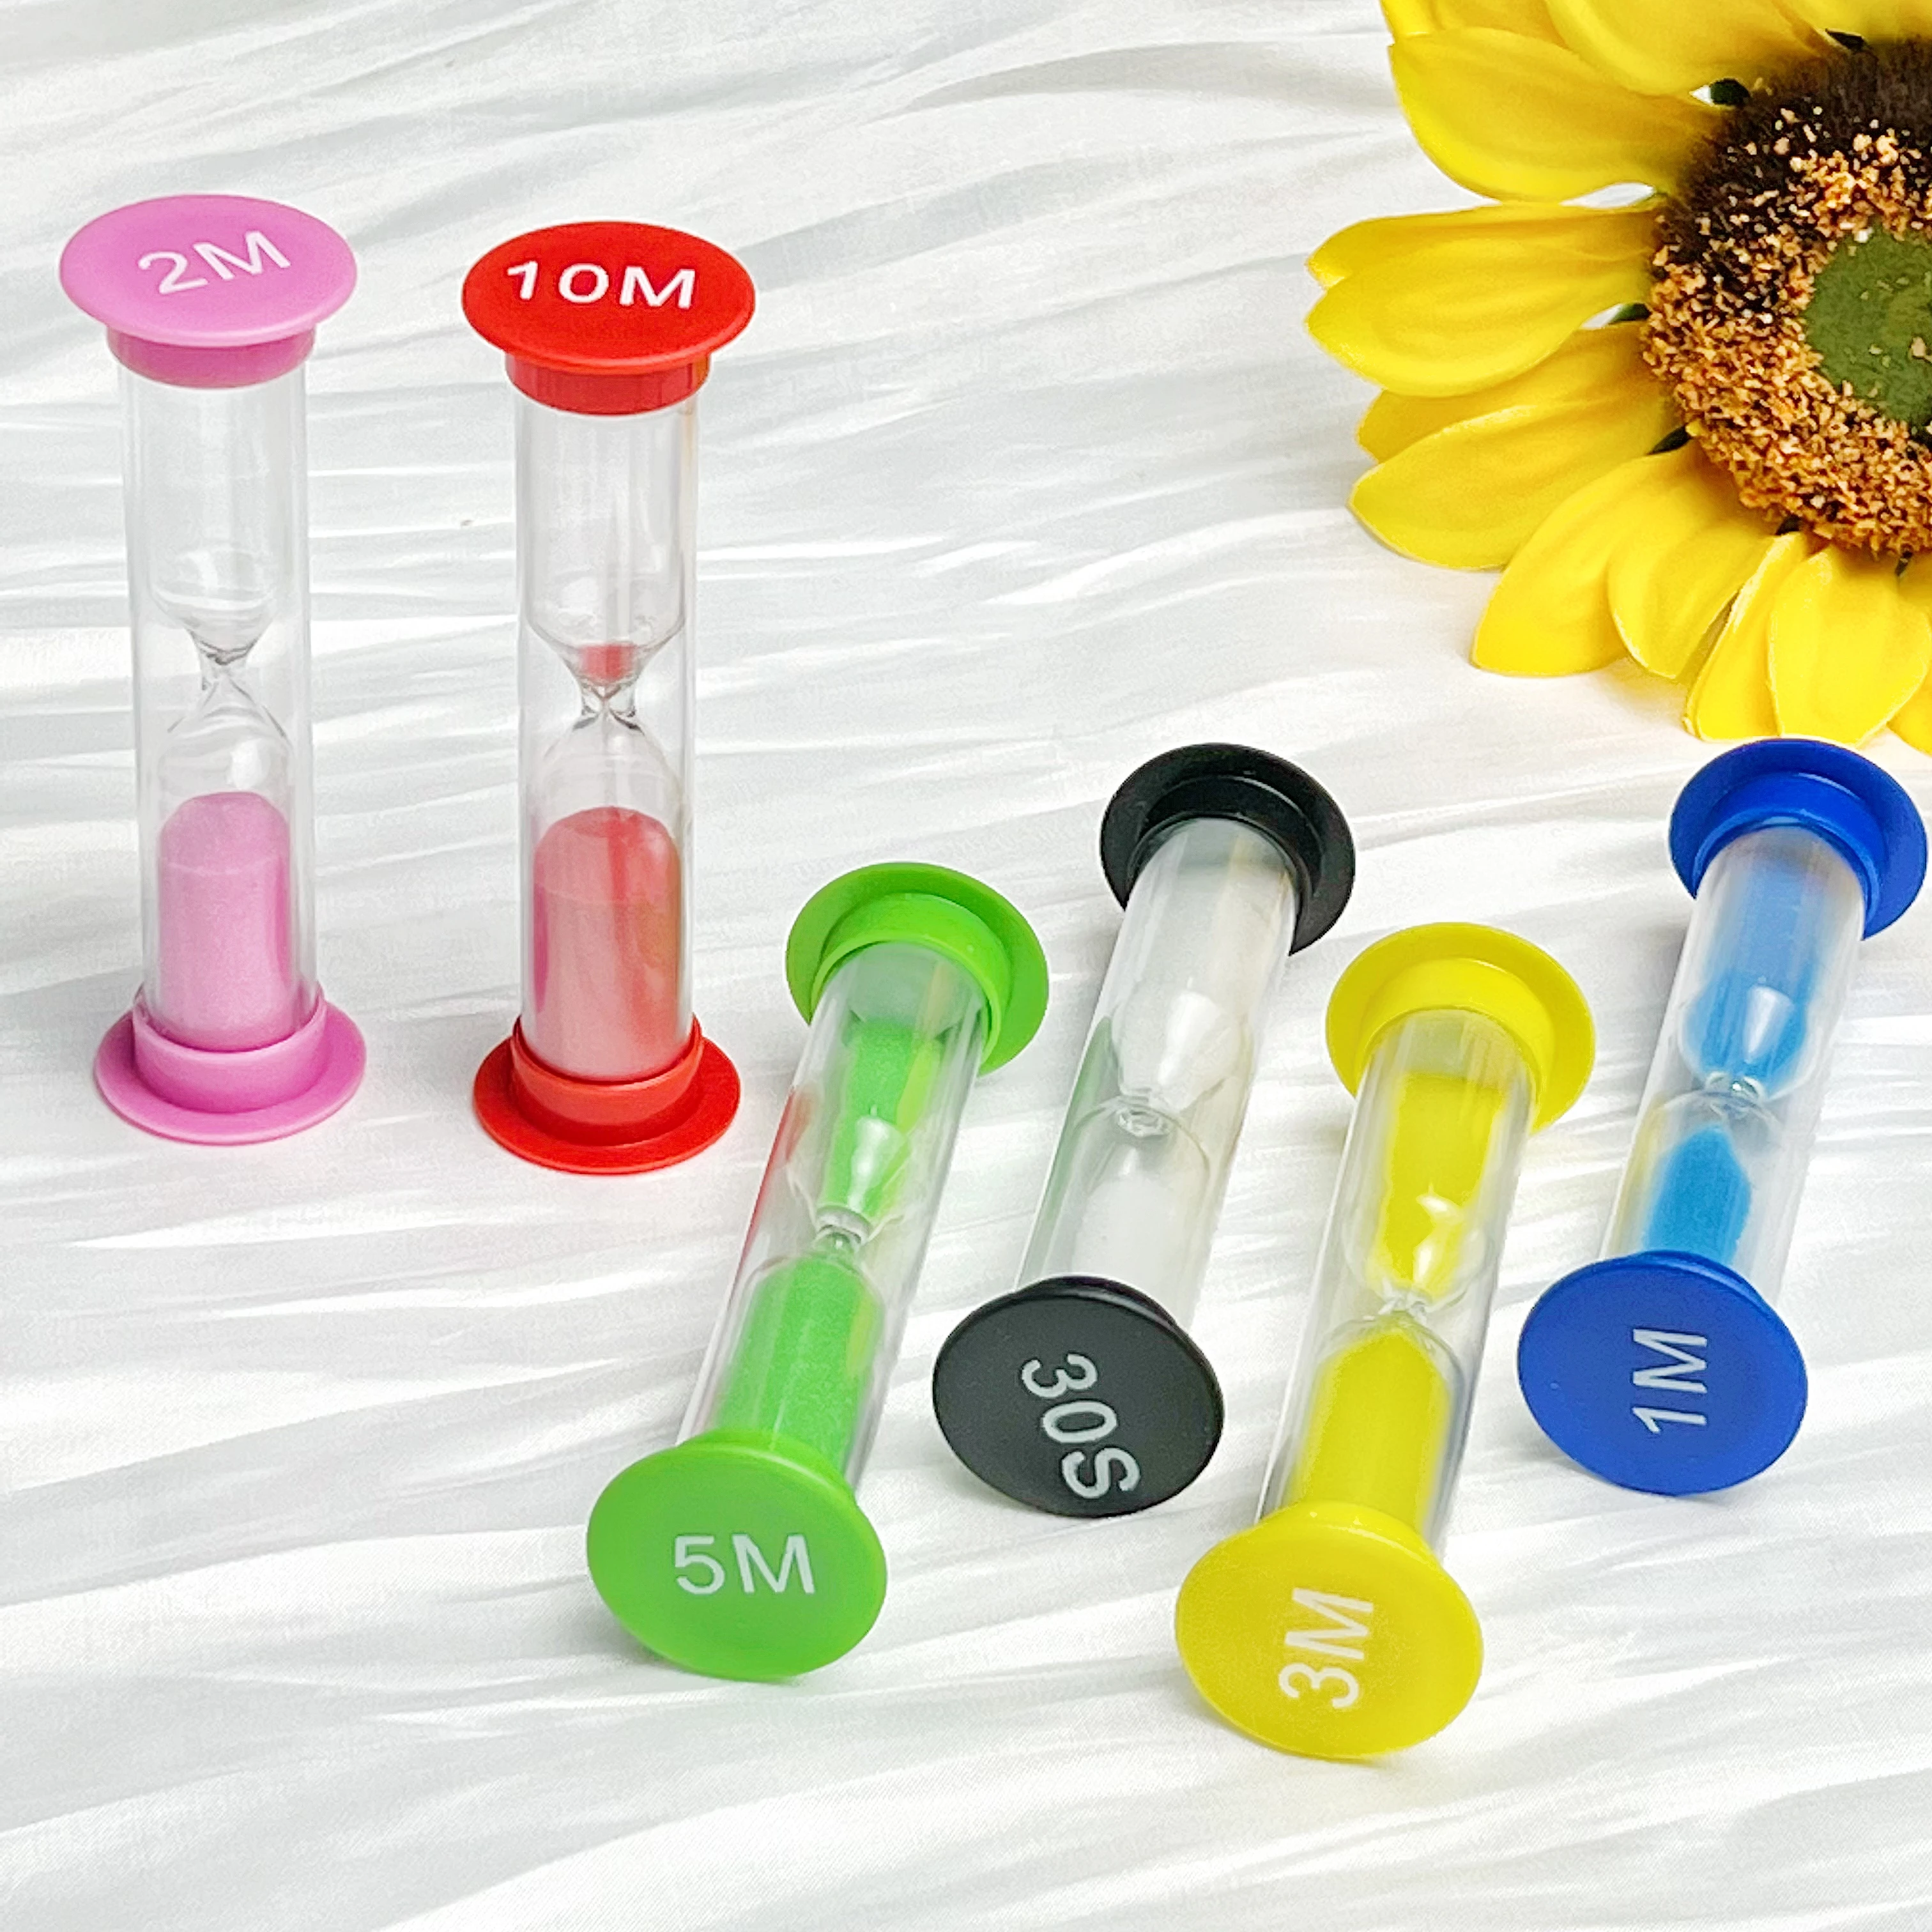 

2/3/5/10 Minute Colorful Hourglass Sandglass Sand Clock Timers Sand Timer Shower Timer Tooth Brushing Timer Children Home Decors